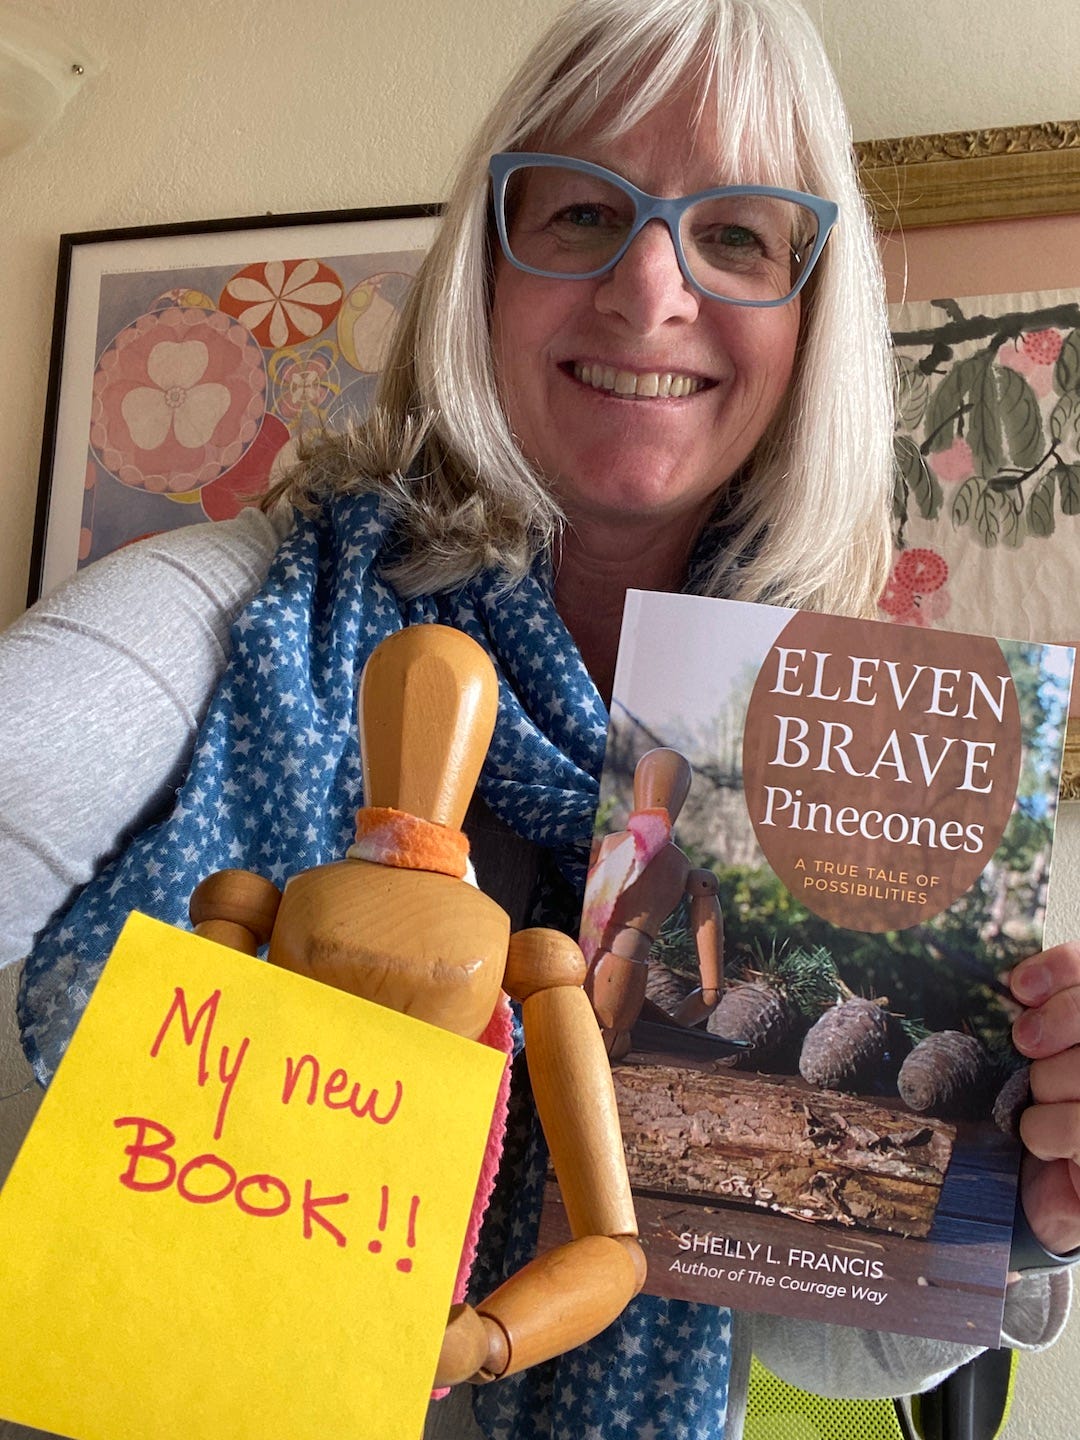 Author Shelly Francis grinning about her new book, shown here, Eleven Brave Pinecones.